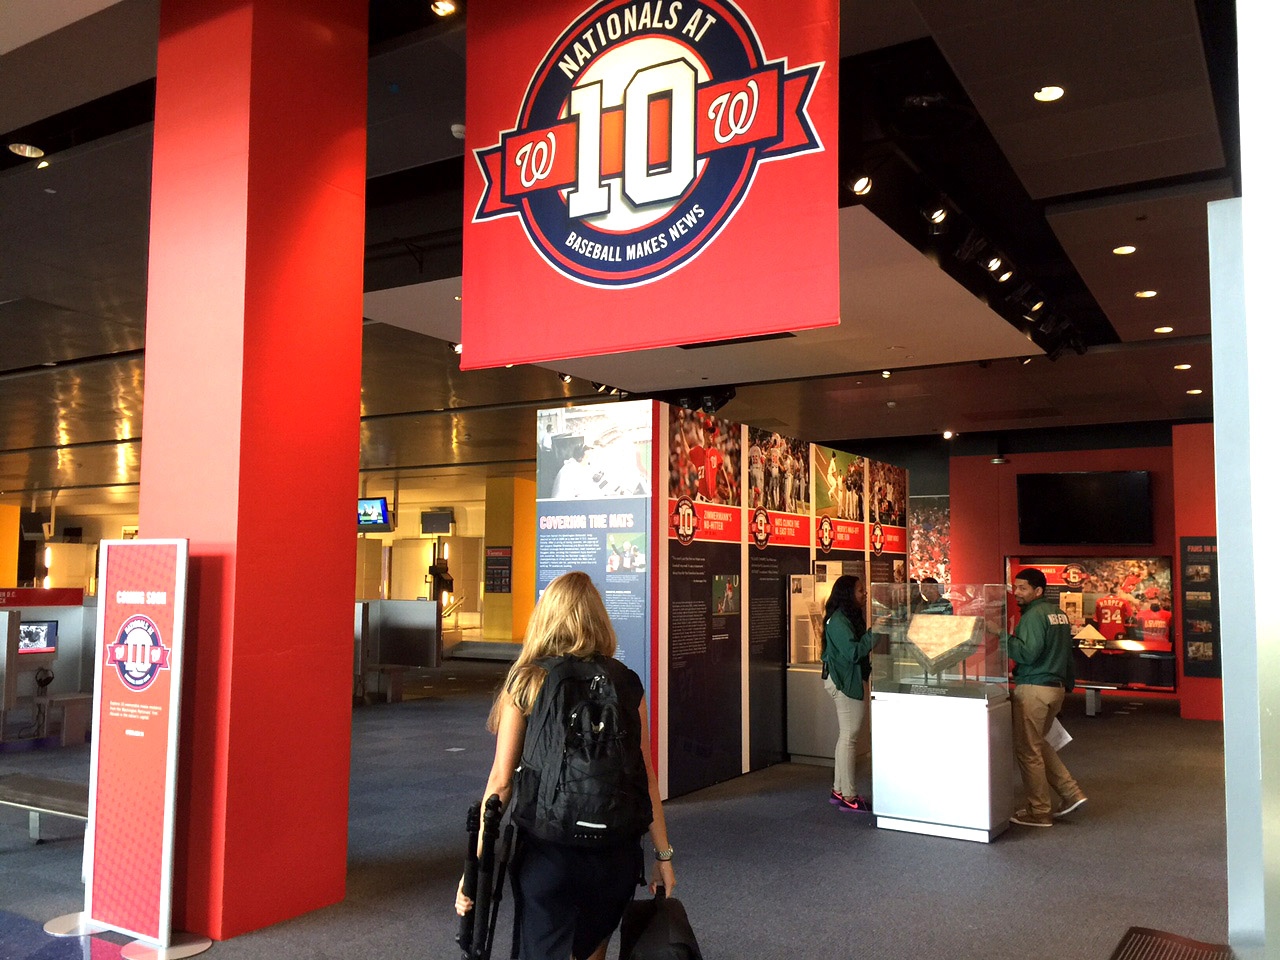 "Nationals at 10: Baseball Makes News" is on display at the <a href="http://www1.newseum.org/online-ad/adults_attraction.html?gclid=CIP675Wug8cCFUsXHwodf44K0Q">Newseum July 31 through Nov. 29, 2015</a>.(WTOP/Kristi King)